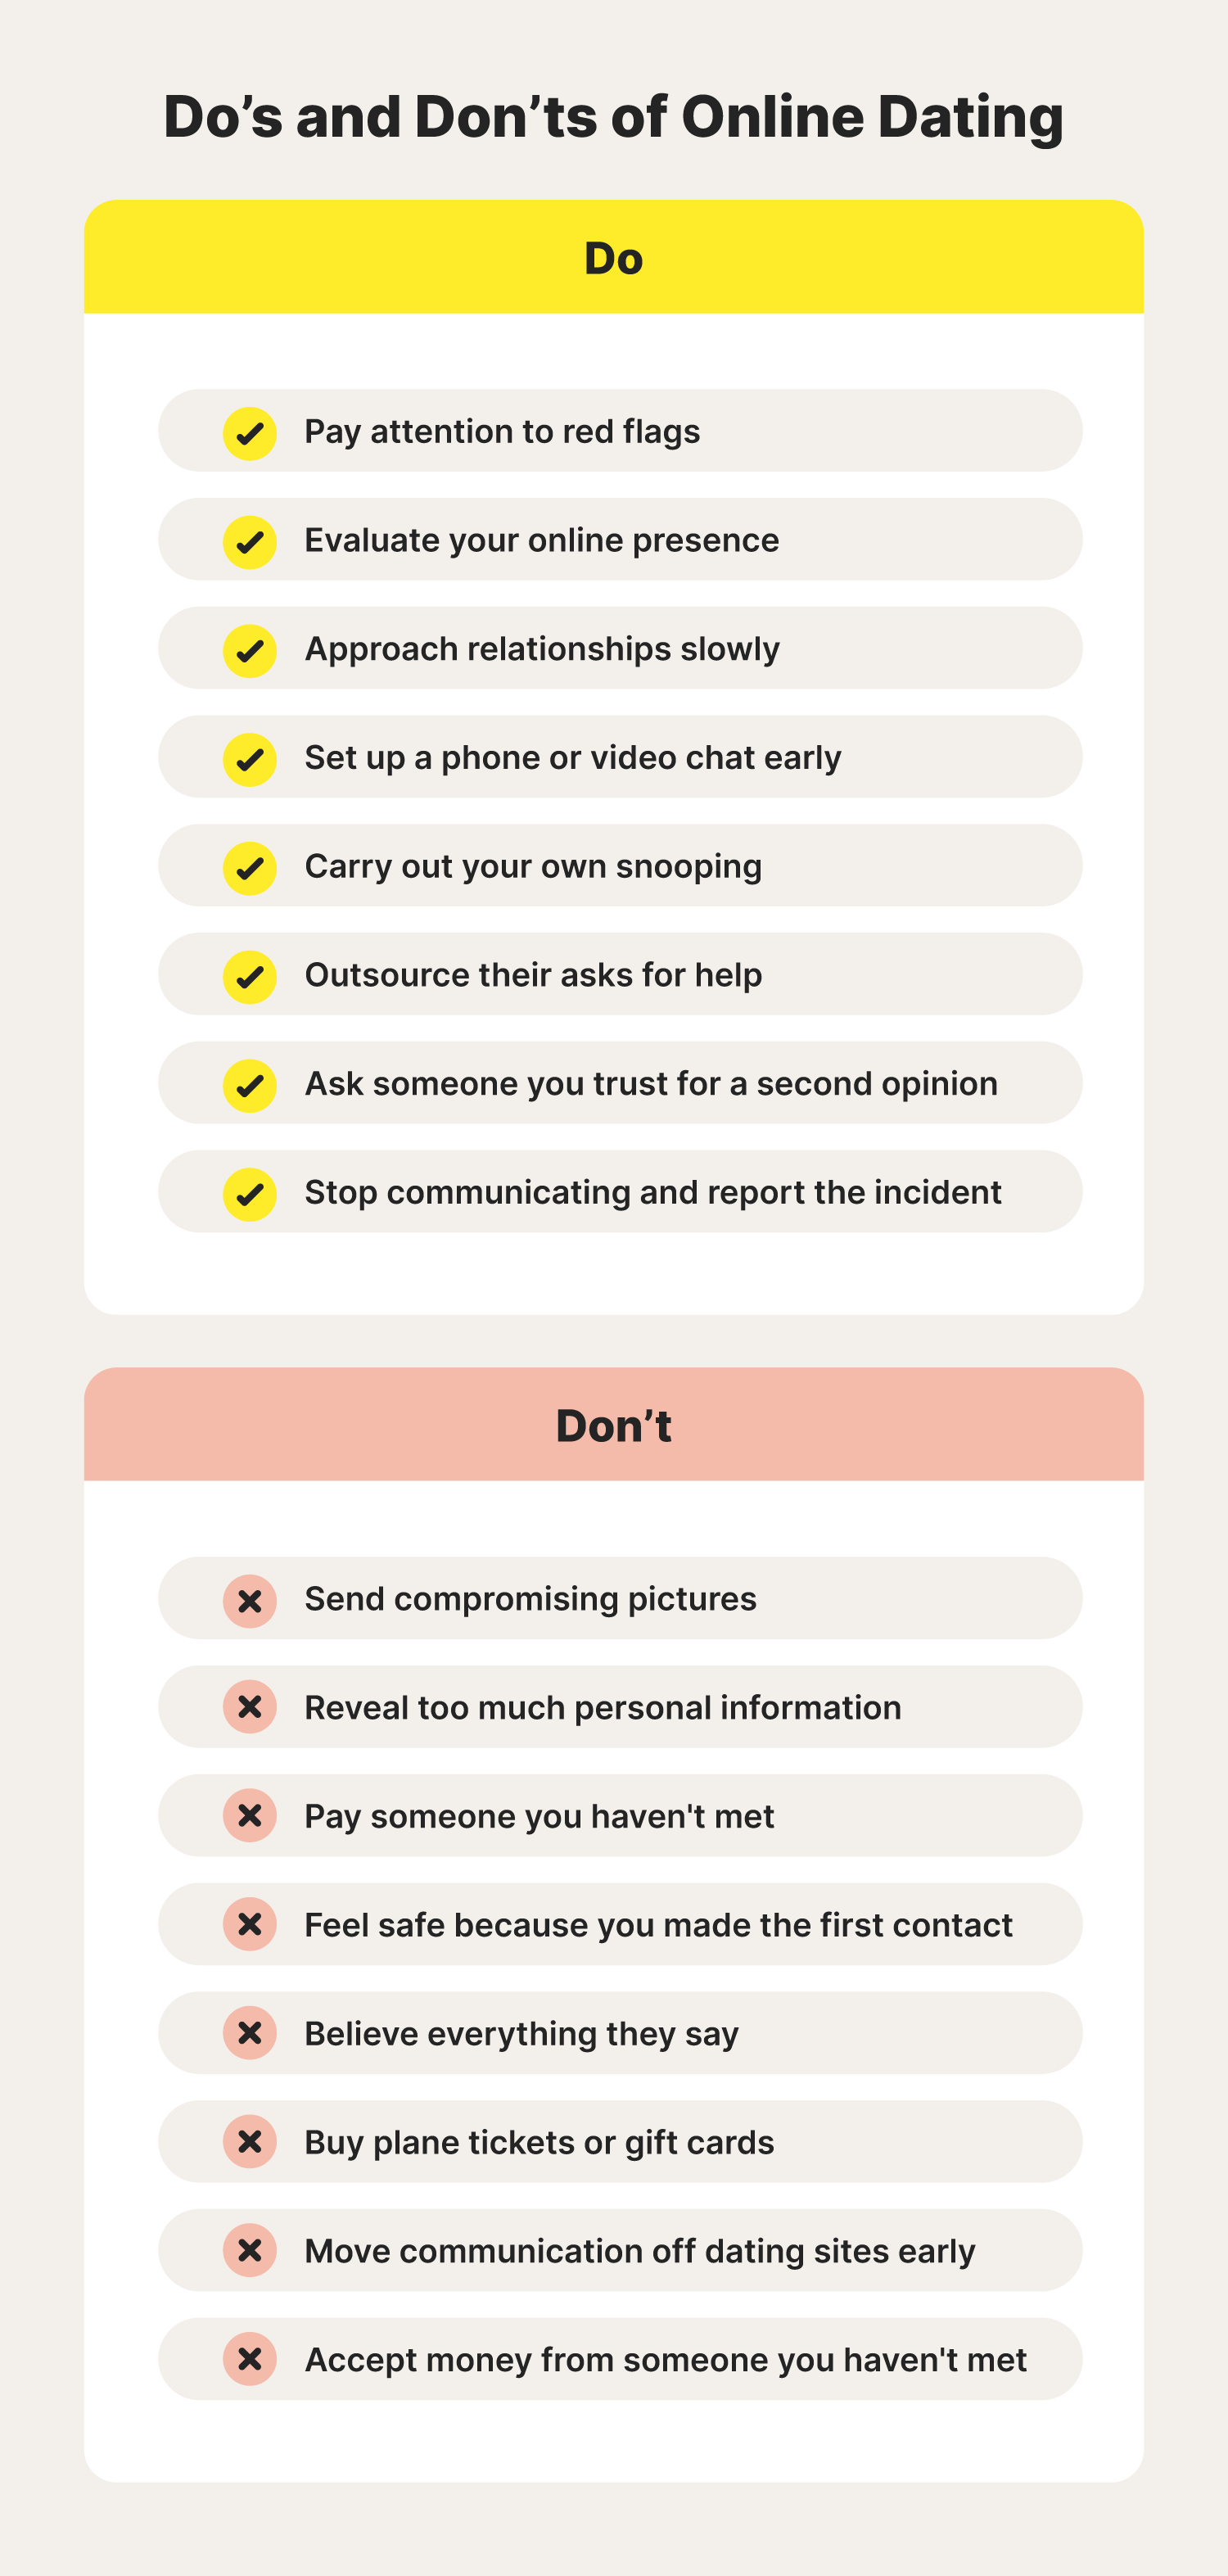 A graphic showcases the do’s and don’ts of online dating to help avoid romance scams.